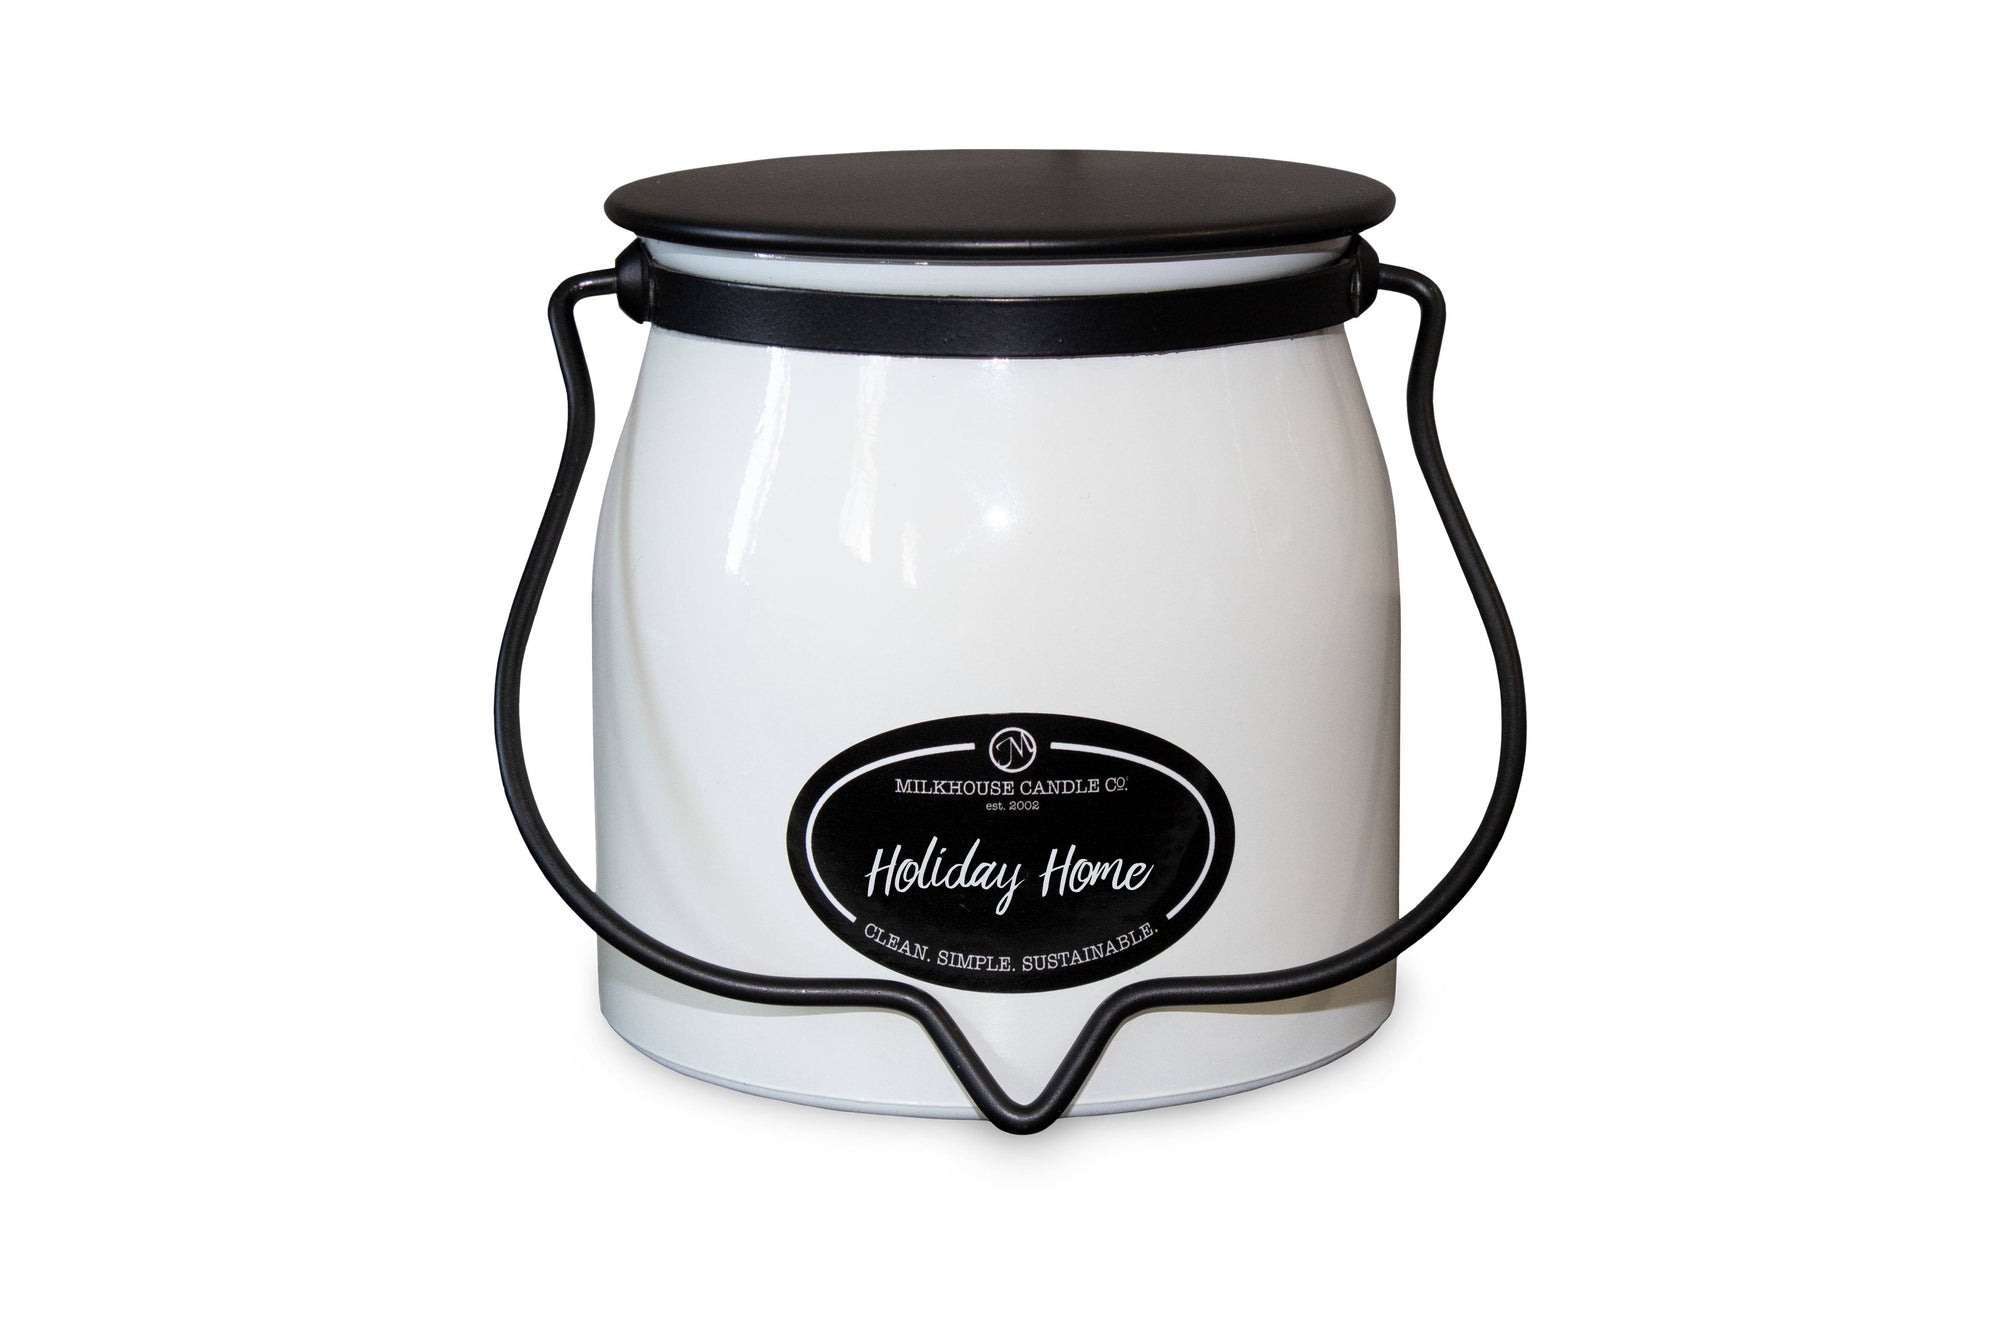 Holiday Home Milkhouse Candle 16 oz.